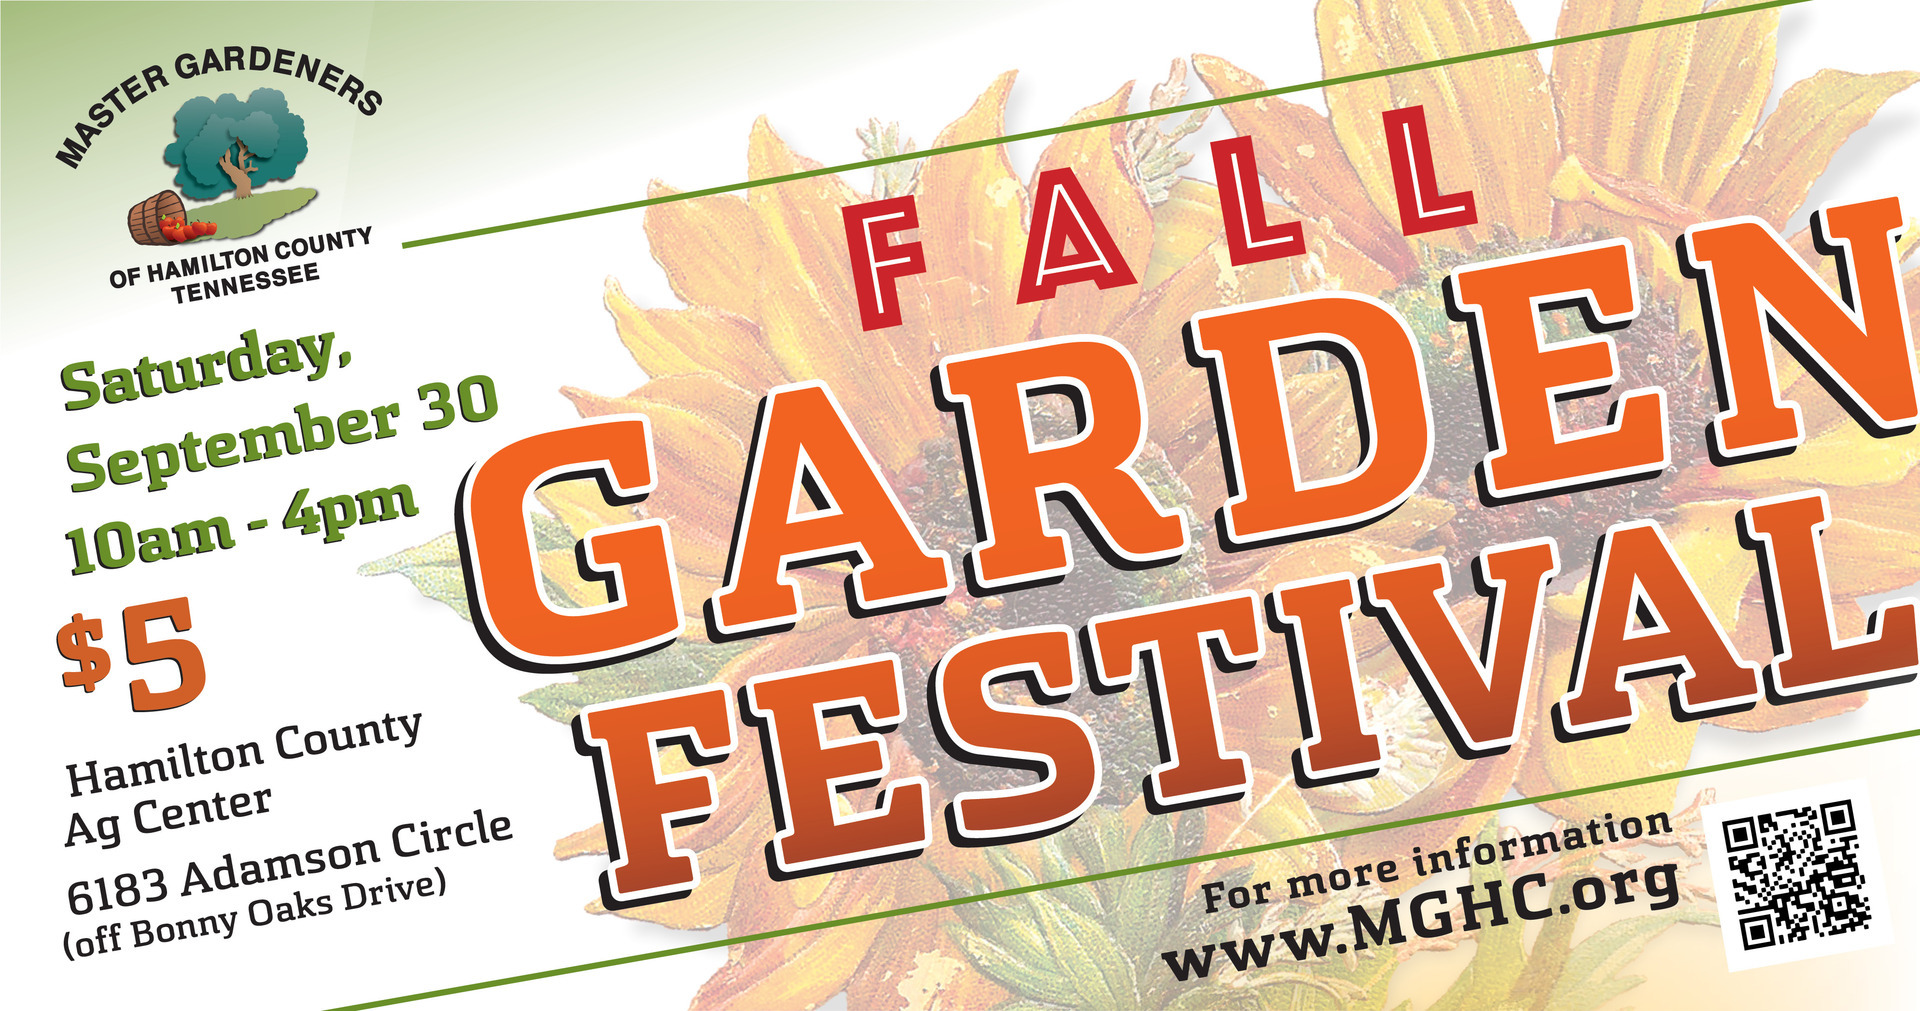 MGHC Annual Fall Garden Festival, Chattanooga, Tennessee, United States